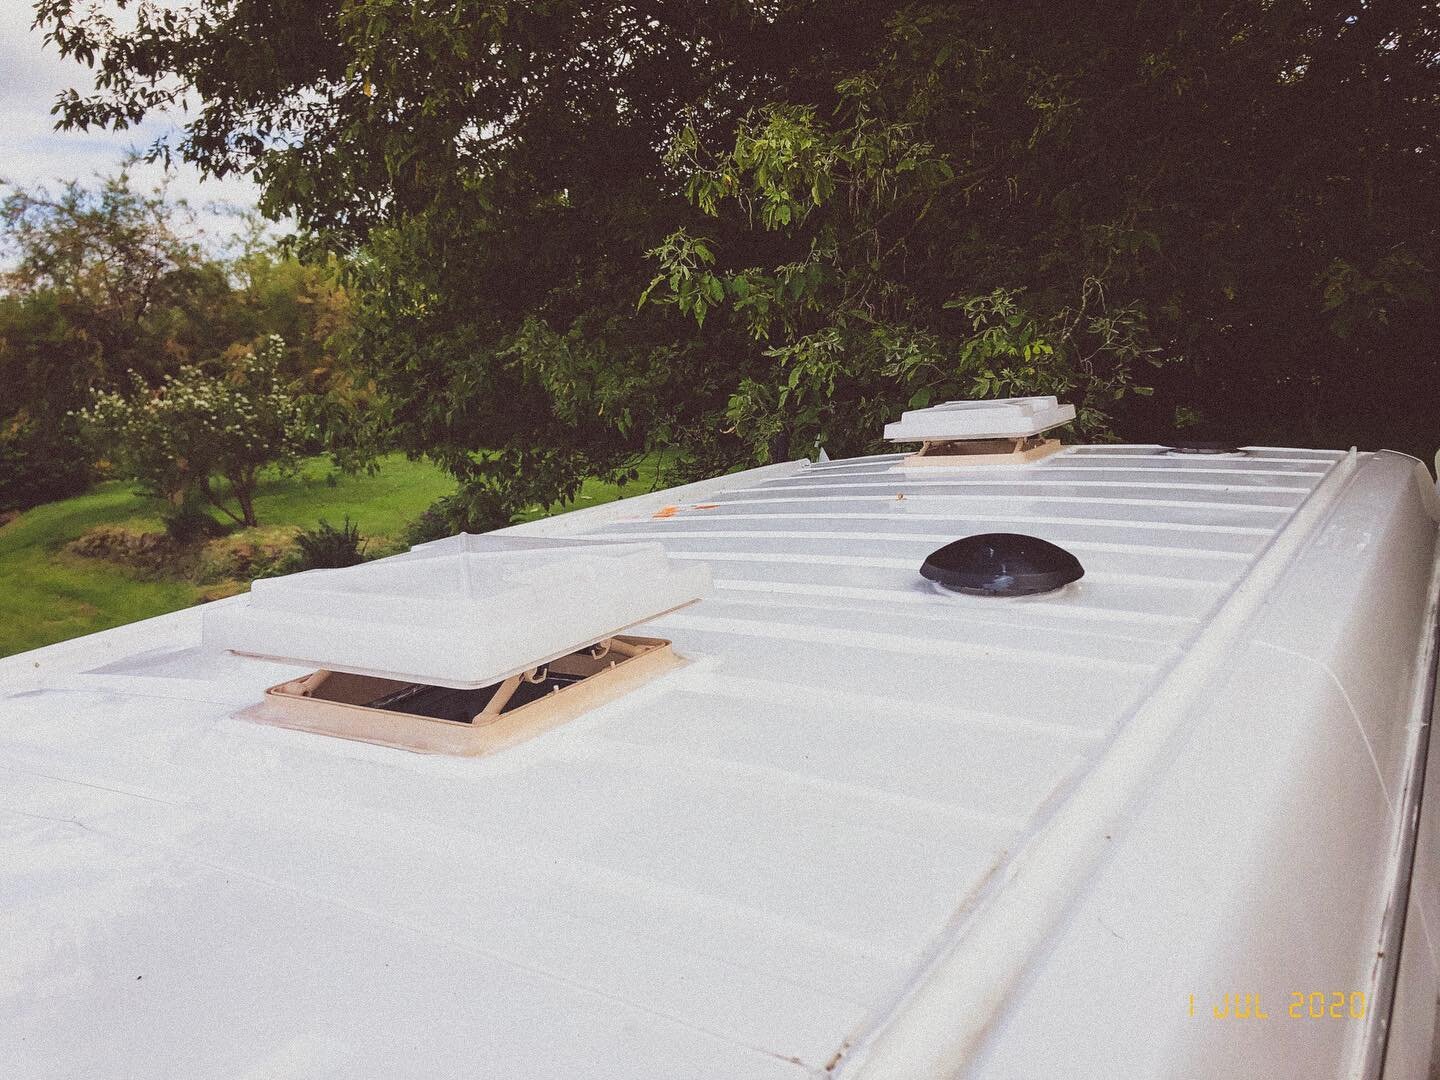 The original vents and mushroom vents were cleaned up and refitted much stronger now 💪🏻🚐 

Just before we had a good few days of rain aswell which was a great first test for them! 

We&rsquo;re now confident we&rsquo;re water tight again and excit